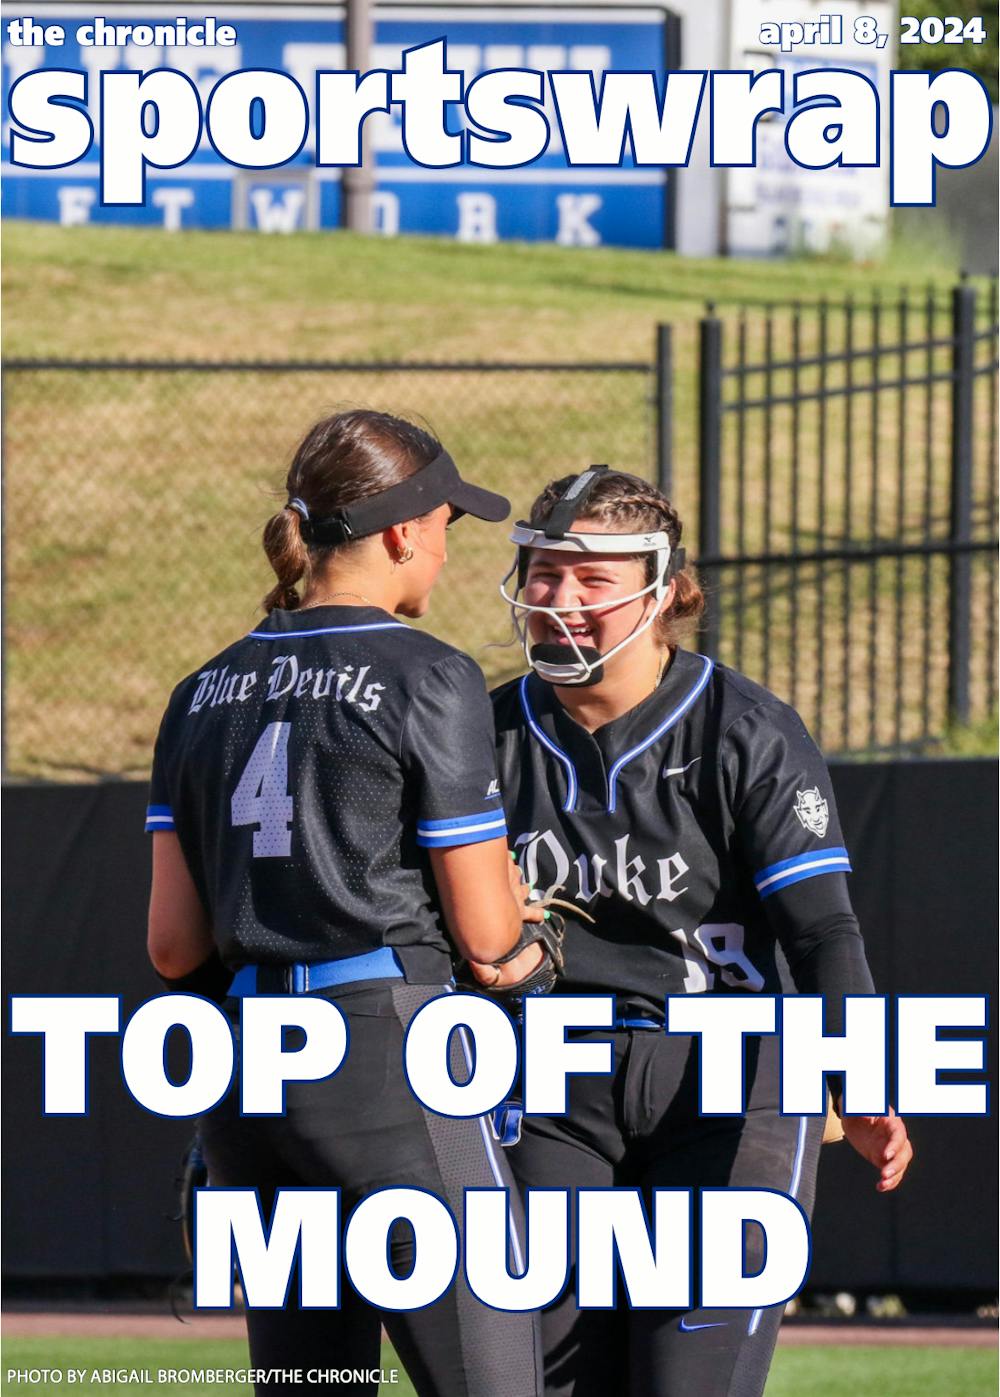 Ana Gold (left) and Cassidy Curd (right) celebrate during Duke's win against Charlotte.